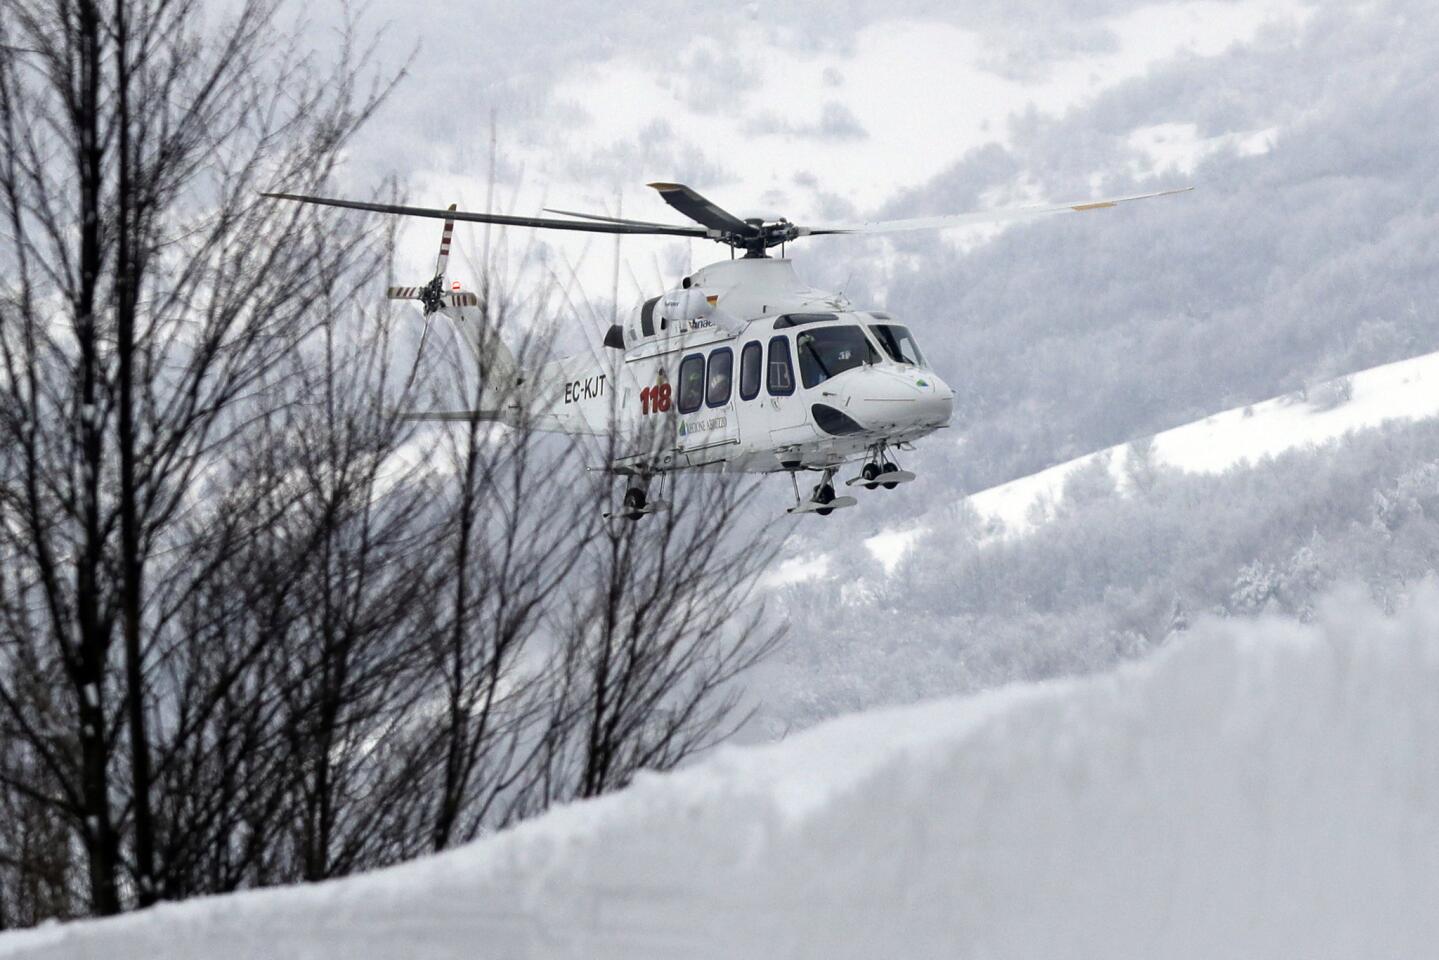 A helicopter approaches the area in Rigopiano, central Italy, where a hotel was buried under an avalanche. Rescue workers were searching for survivors who had been buried under the debris.